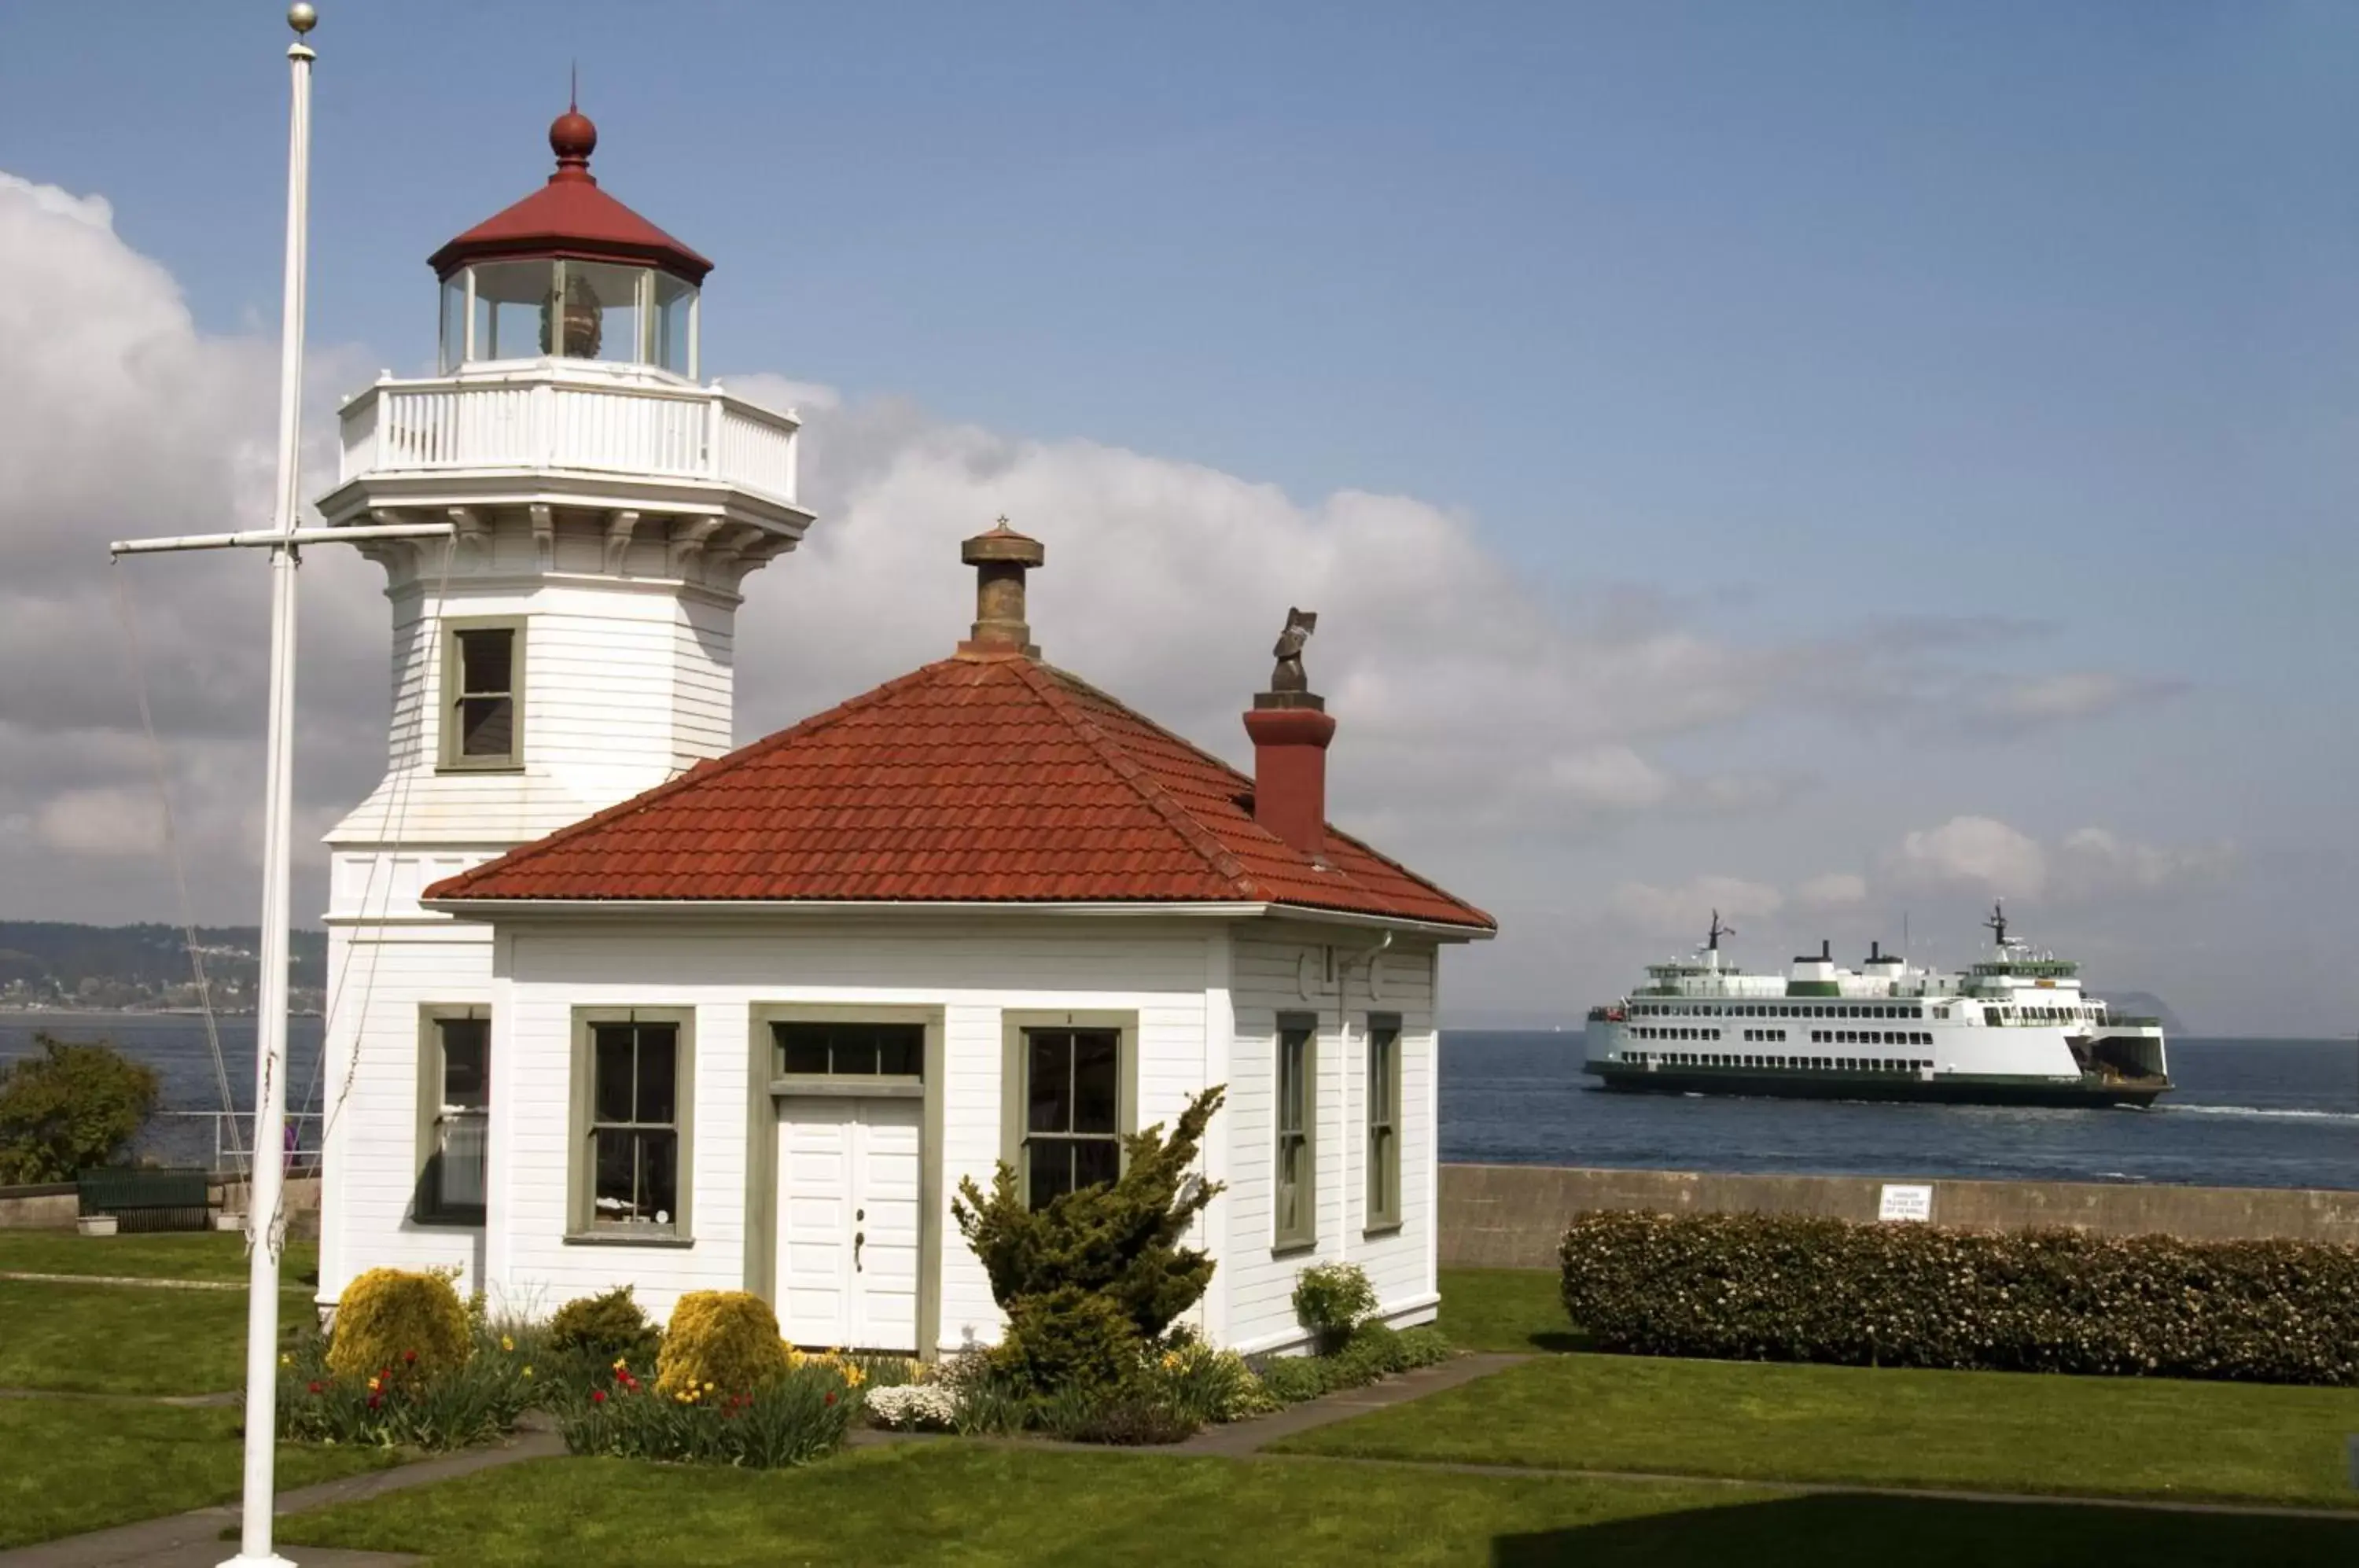 Nearby landmark, Property Building in Silver Cloud Hotel - Mukilteo Waterfront